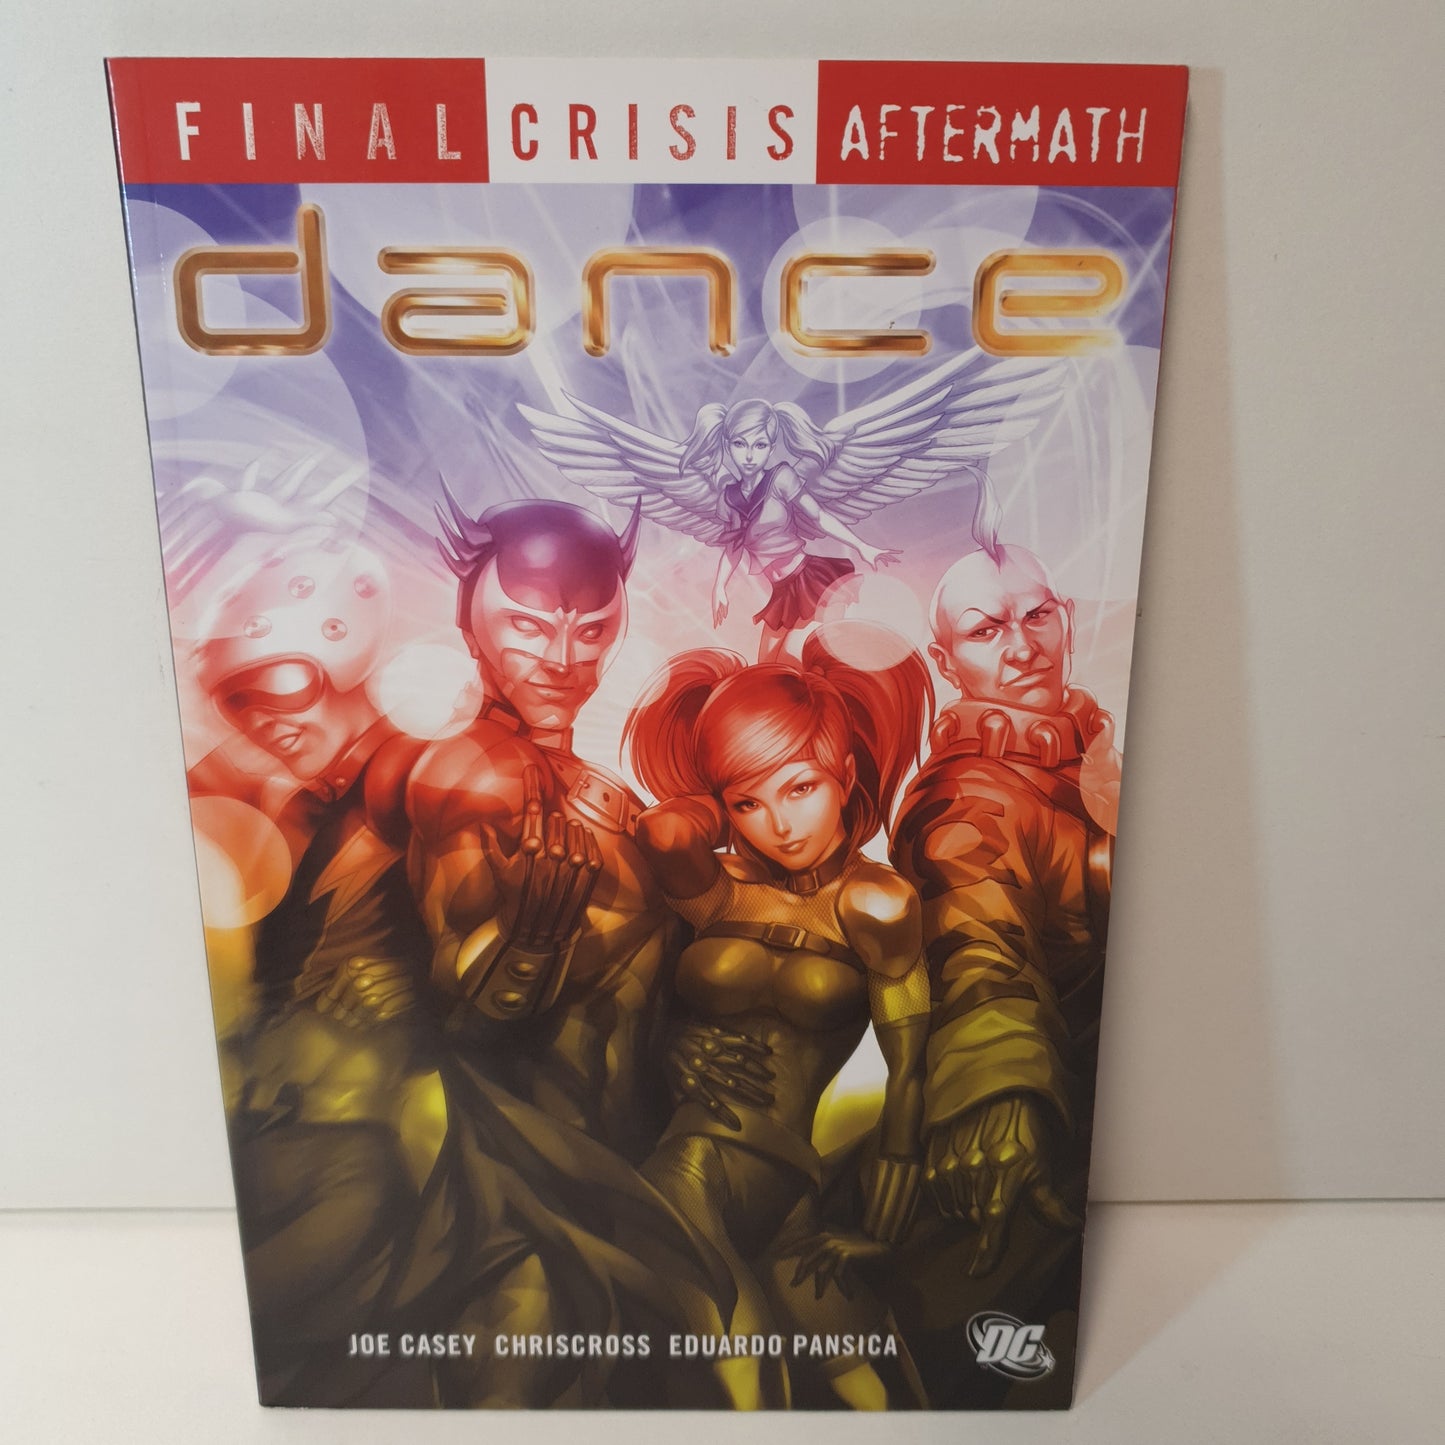 Final Crisis Aftermath: Dance by Casey, .... (2009)